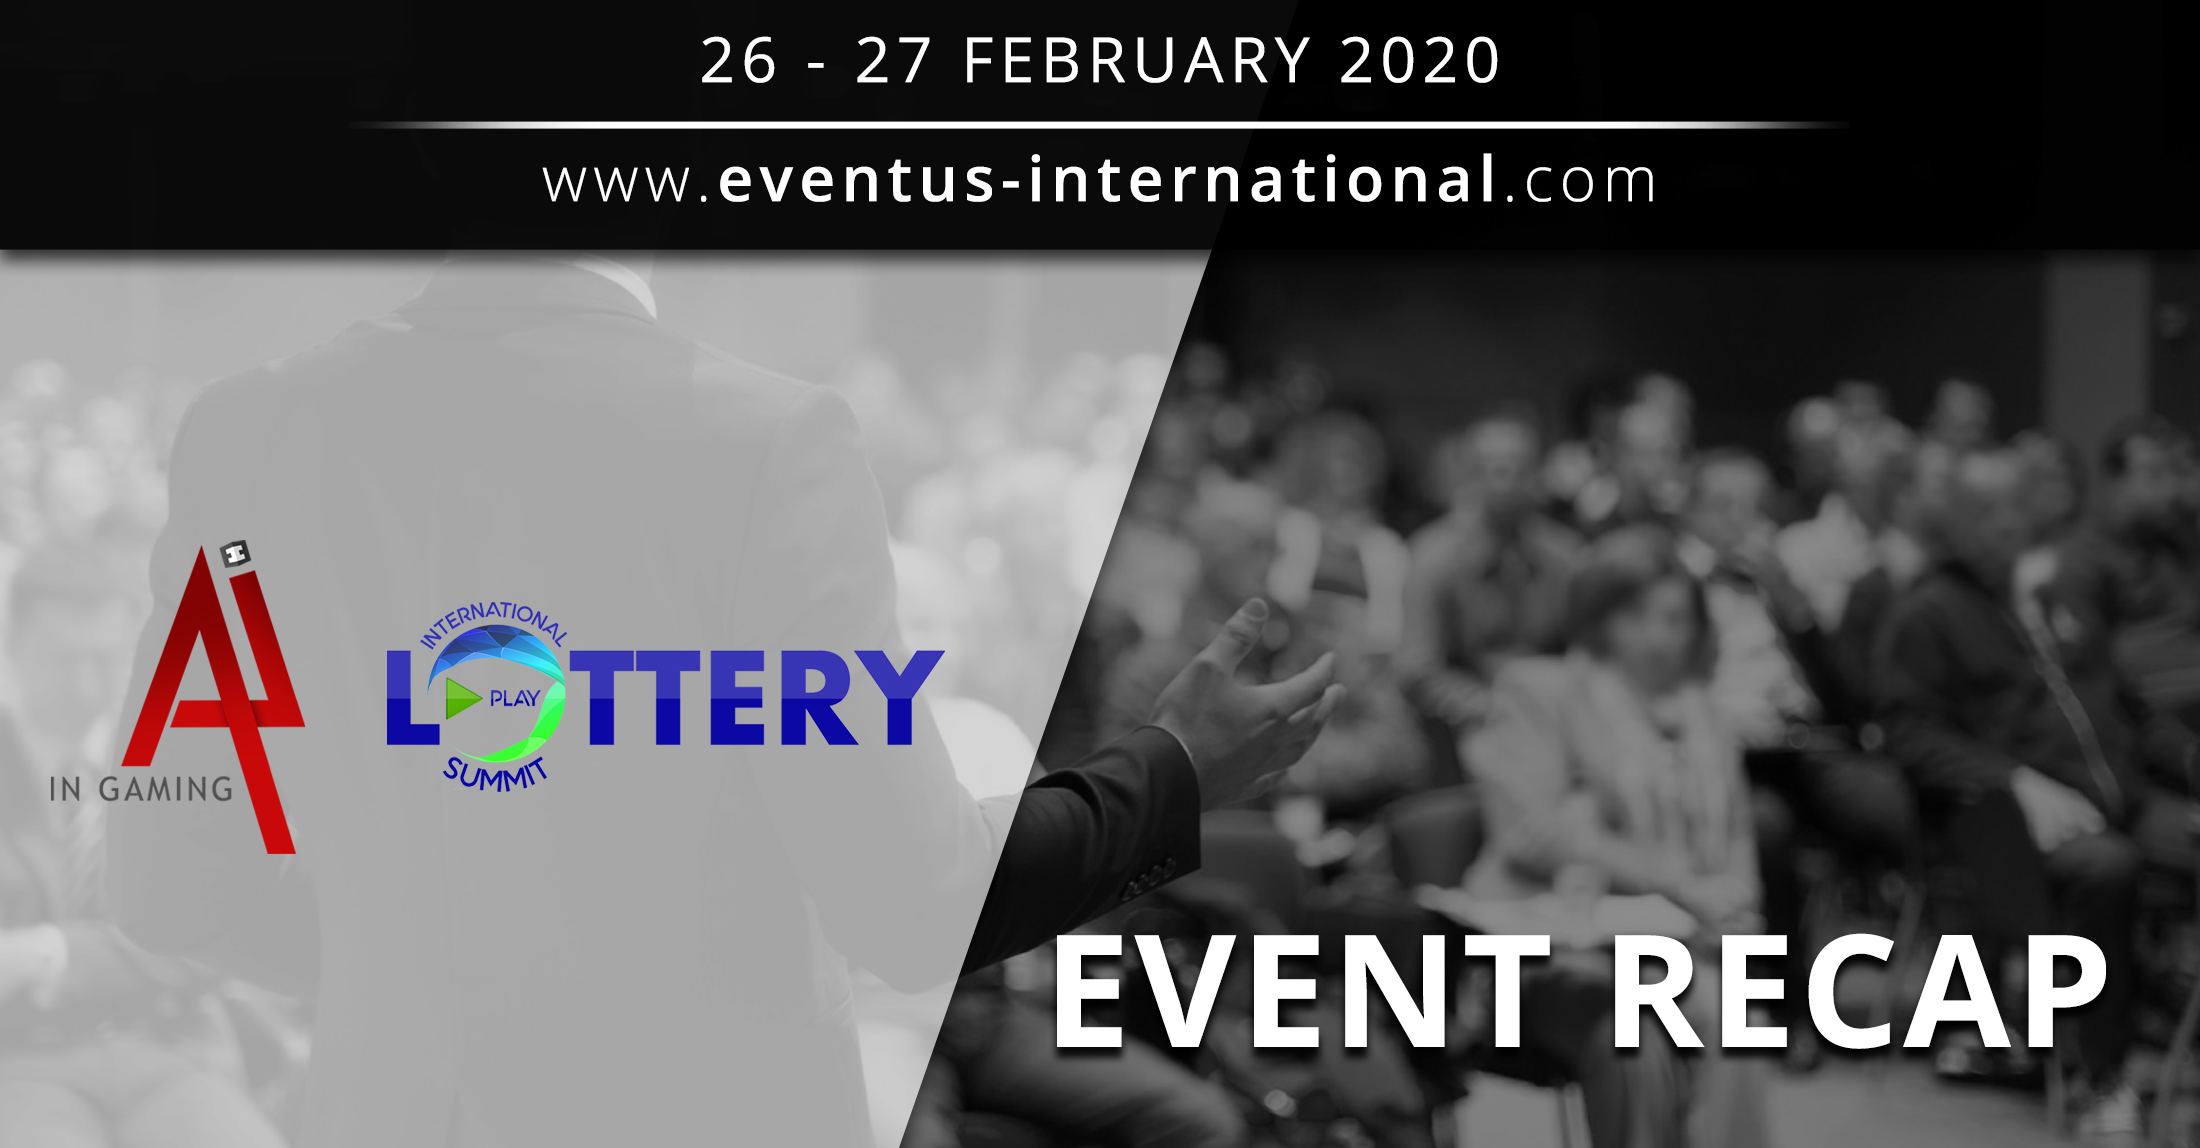 AI In Gaming: International Lottery Play Summit 2020: Event Recap, Disussions and Information